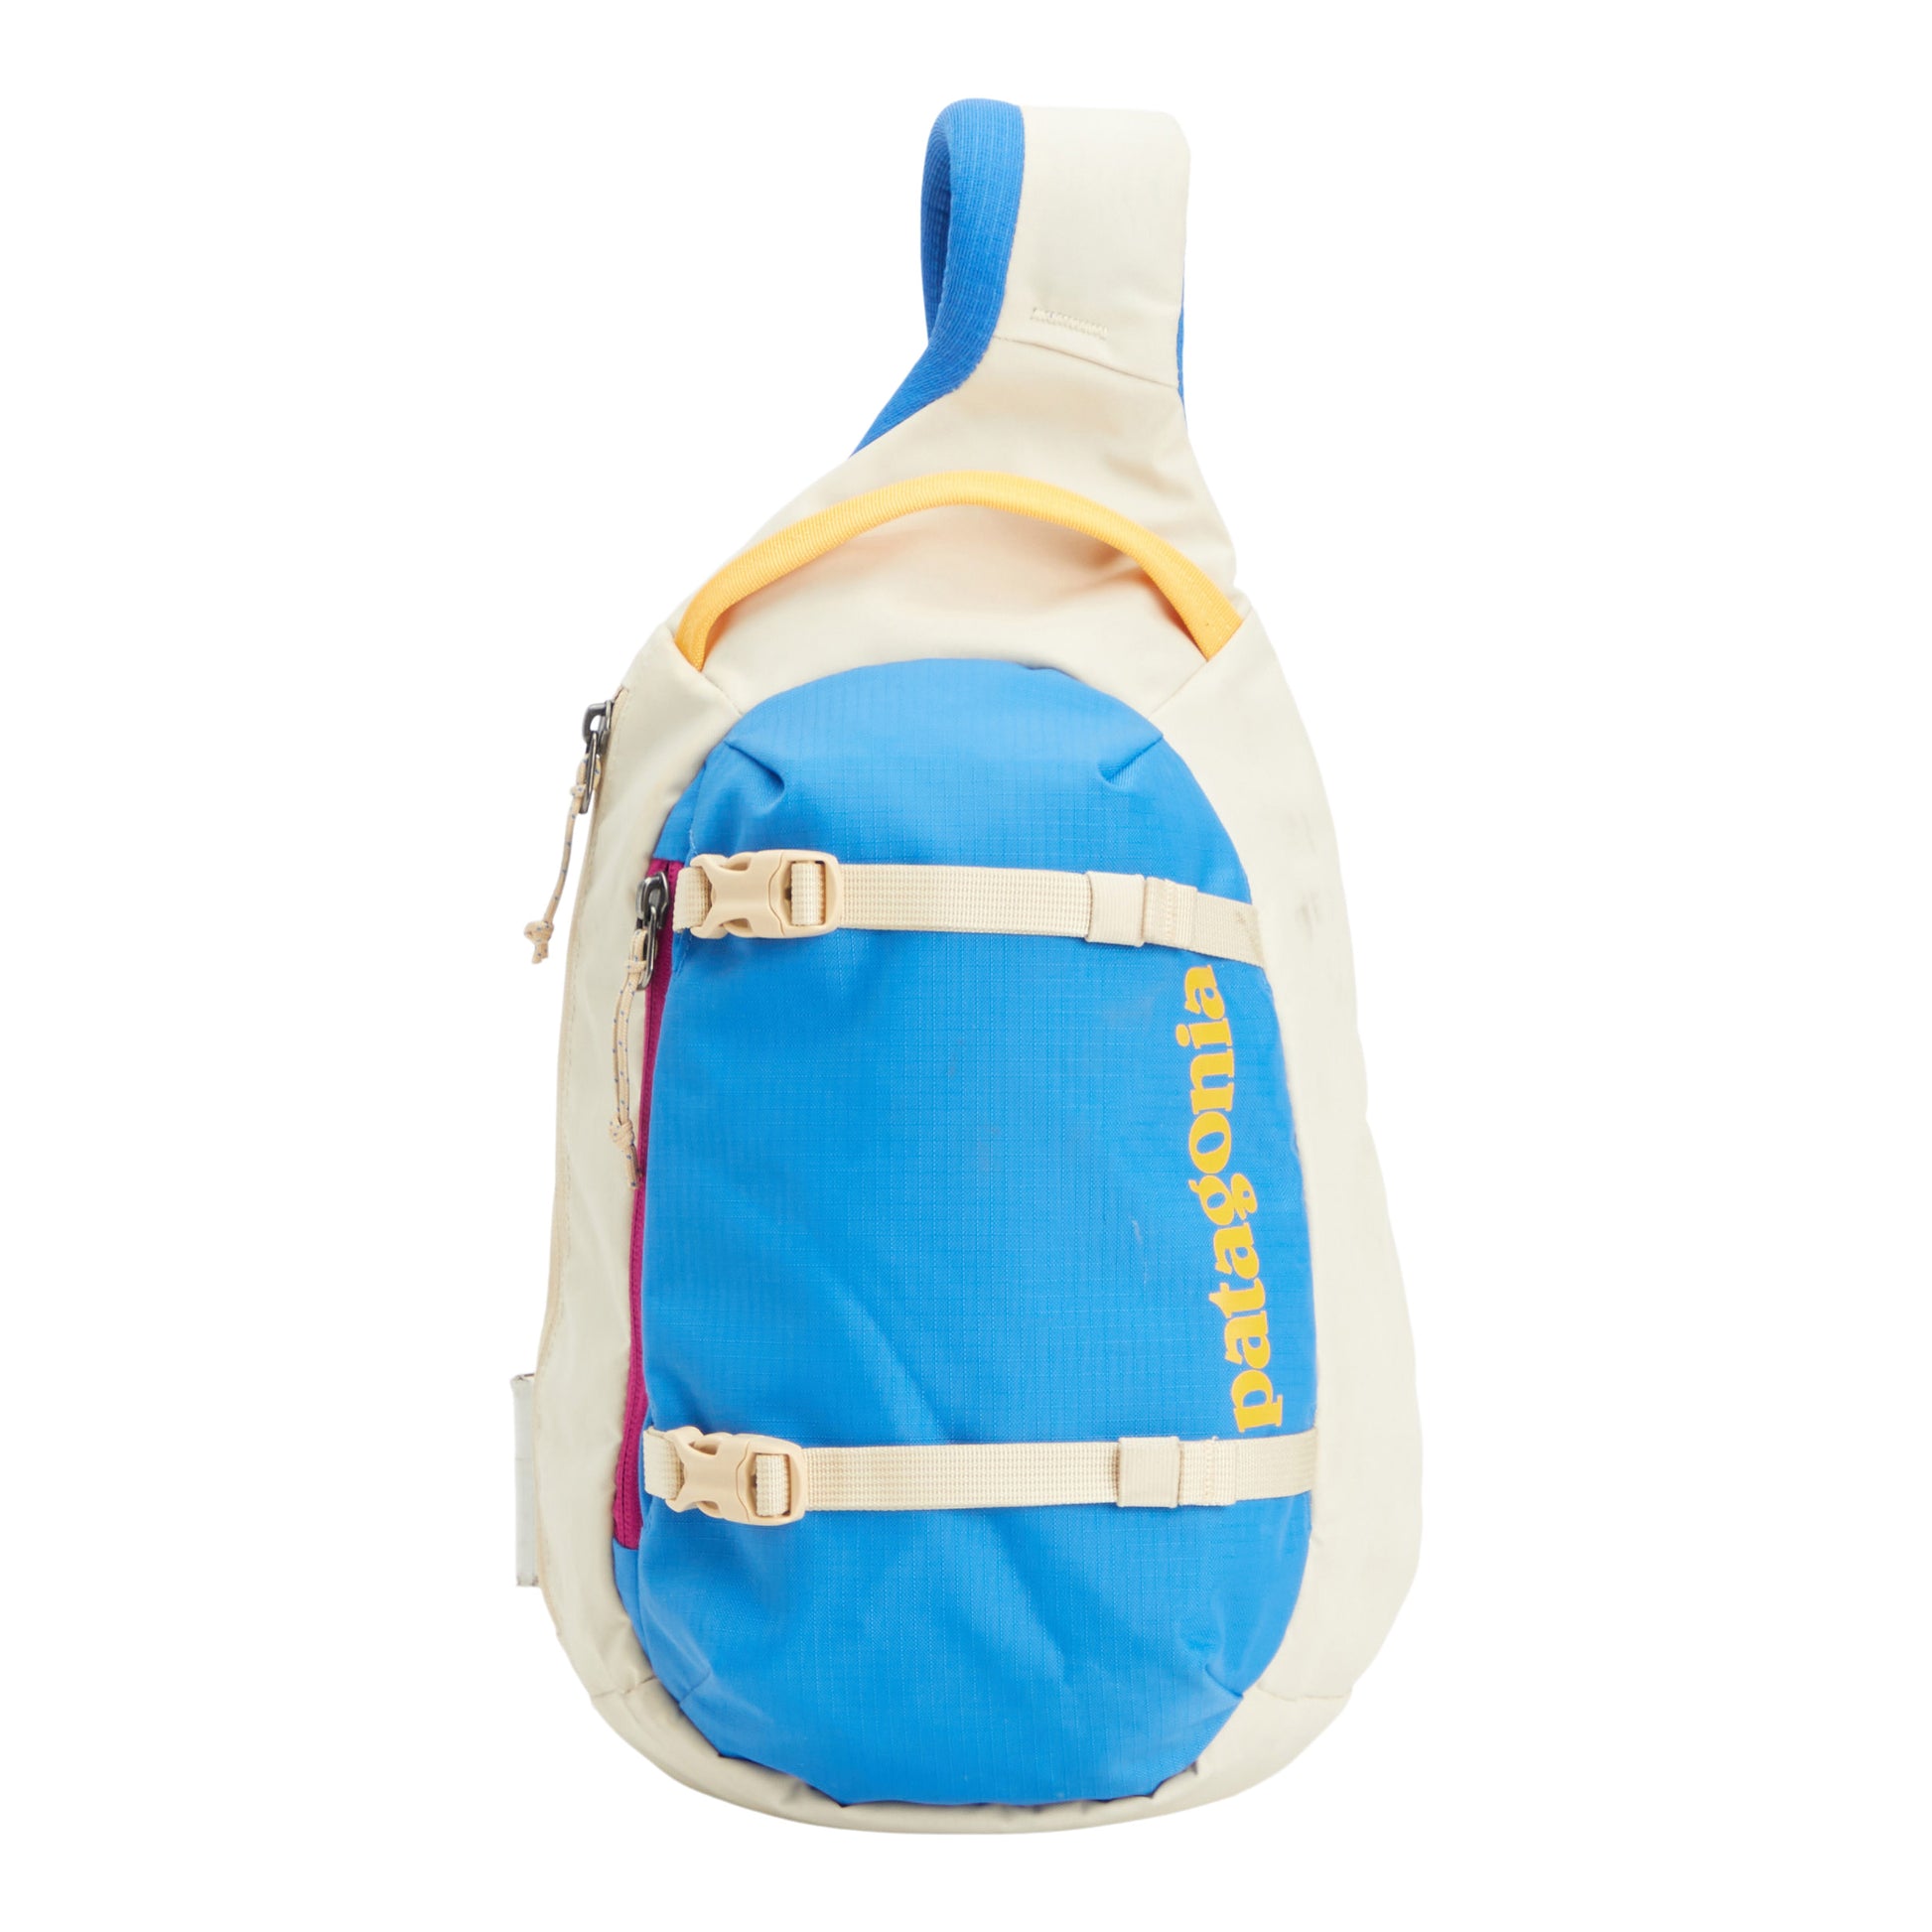 Explore with Style: Patagonia Atom 8L Sling Bag in Birch White